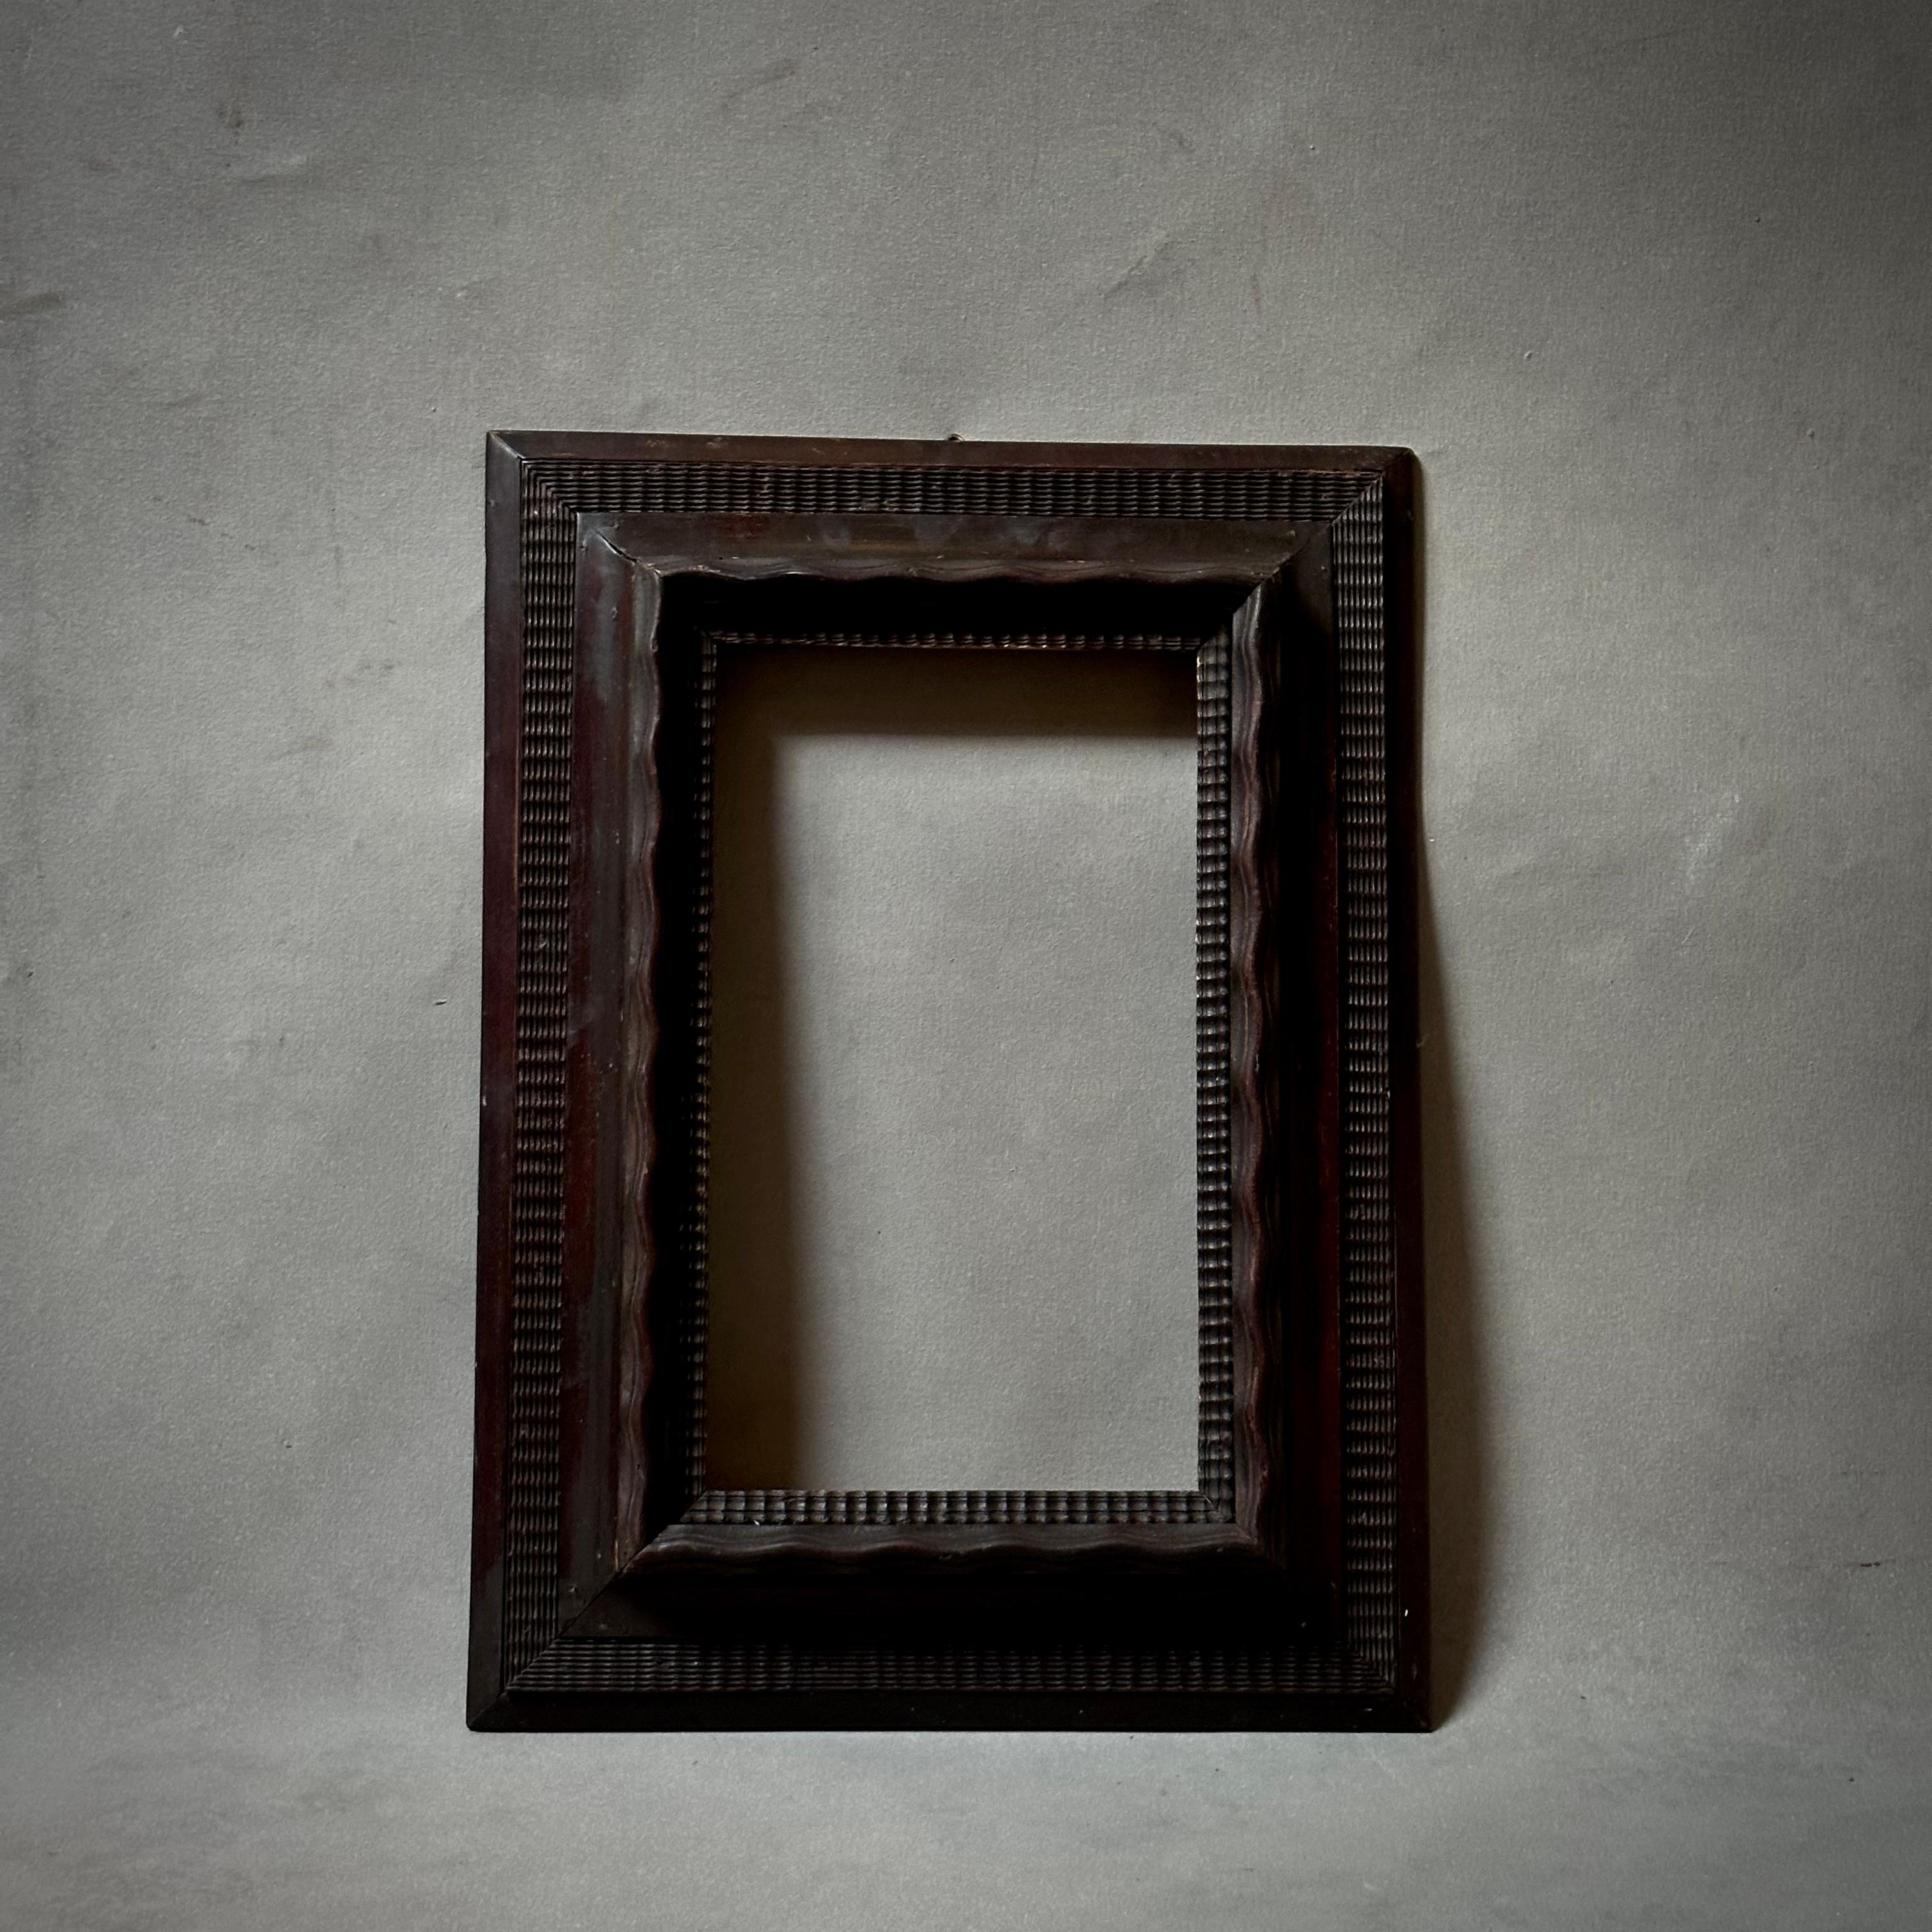 Deeply stained rectangular carved wood frame with graphic carved detailing from late nineteenth century Italy. Substantial yet understated with unique detailing.

Italy, circa 1880

Dimensions: 15.5W x 3D x 22H (8.75 x 14.5 inside).